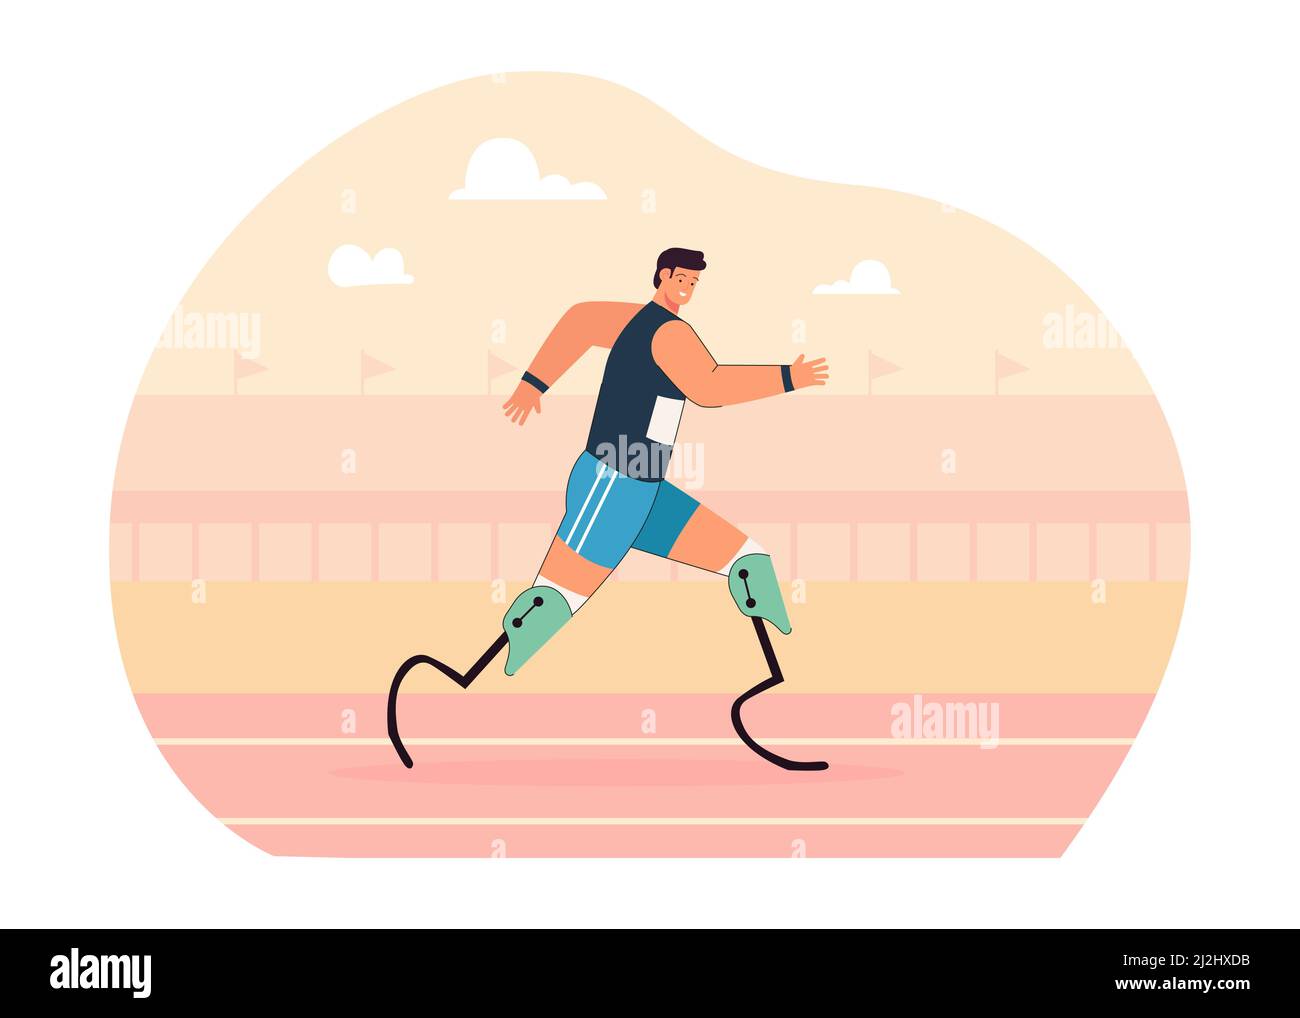 Runner with prosthetic legs jogging on sport track. Handicapped man with physical disability training on prostheses, running marathon flat vector illu Stock Vector